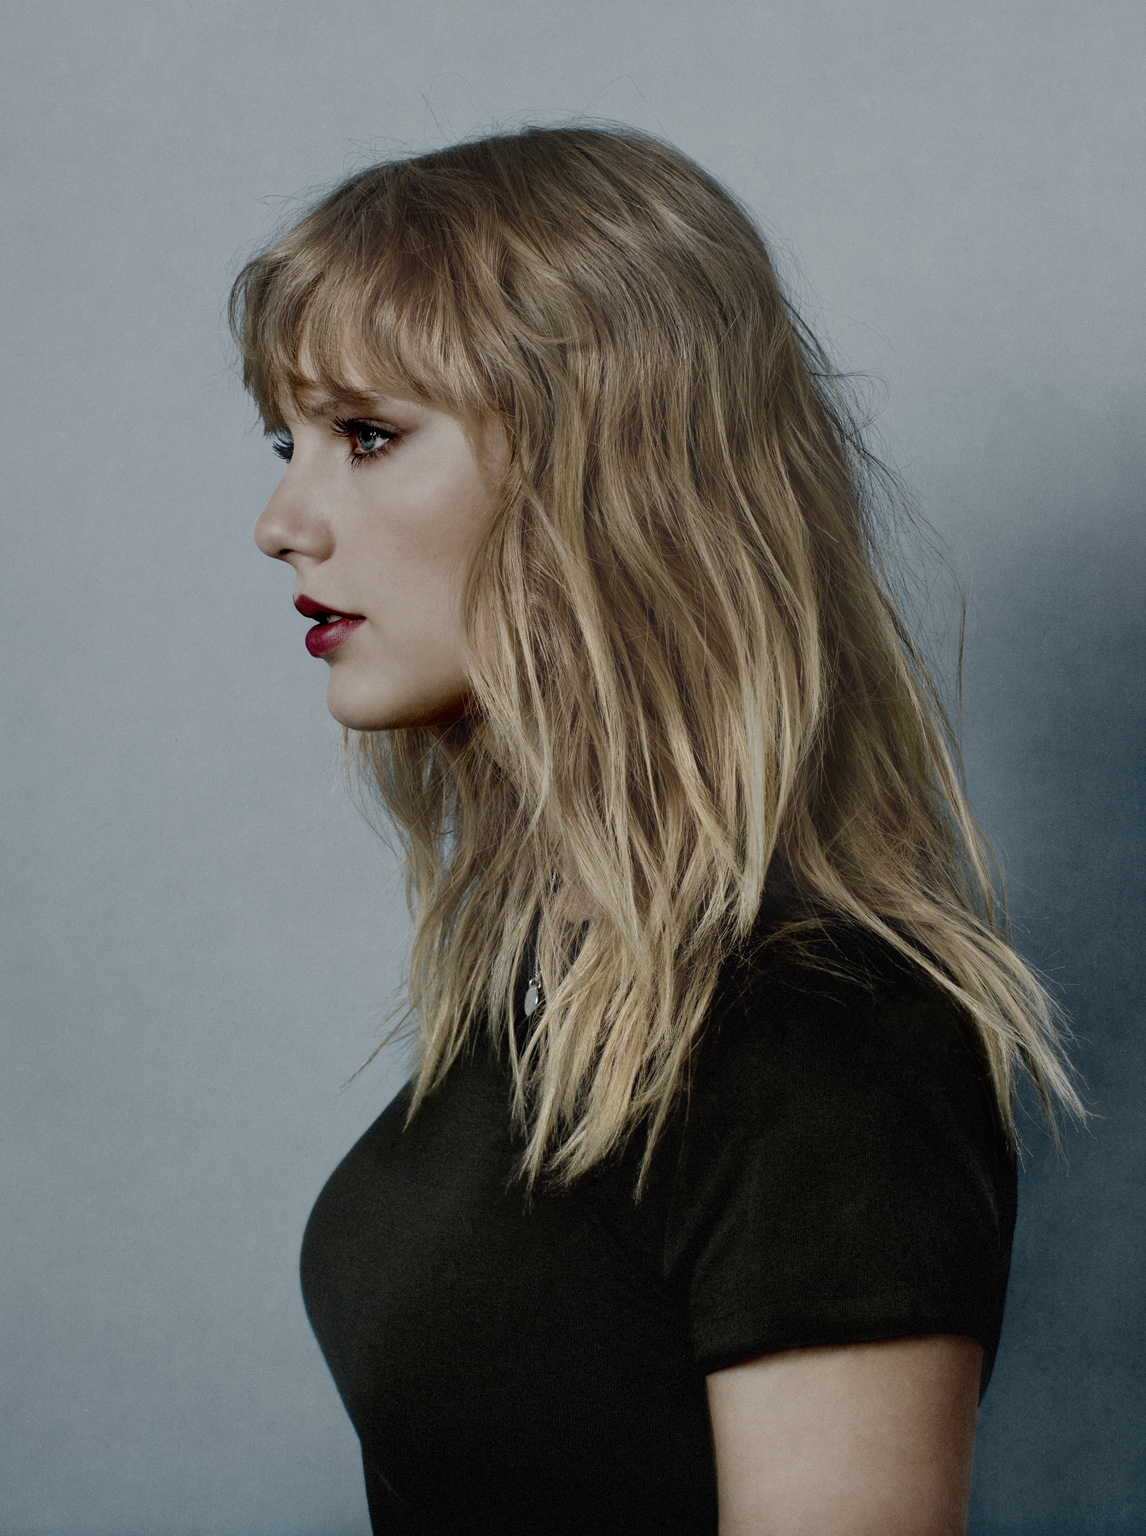 Taylor Swift, photographed Nov. 2017. (Billy & Hells for TIME)